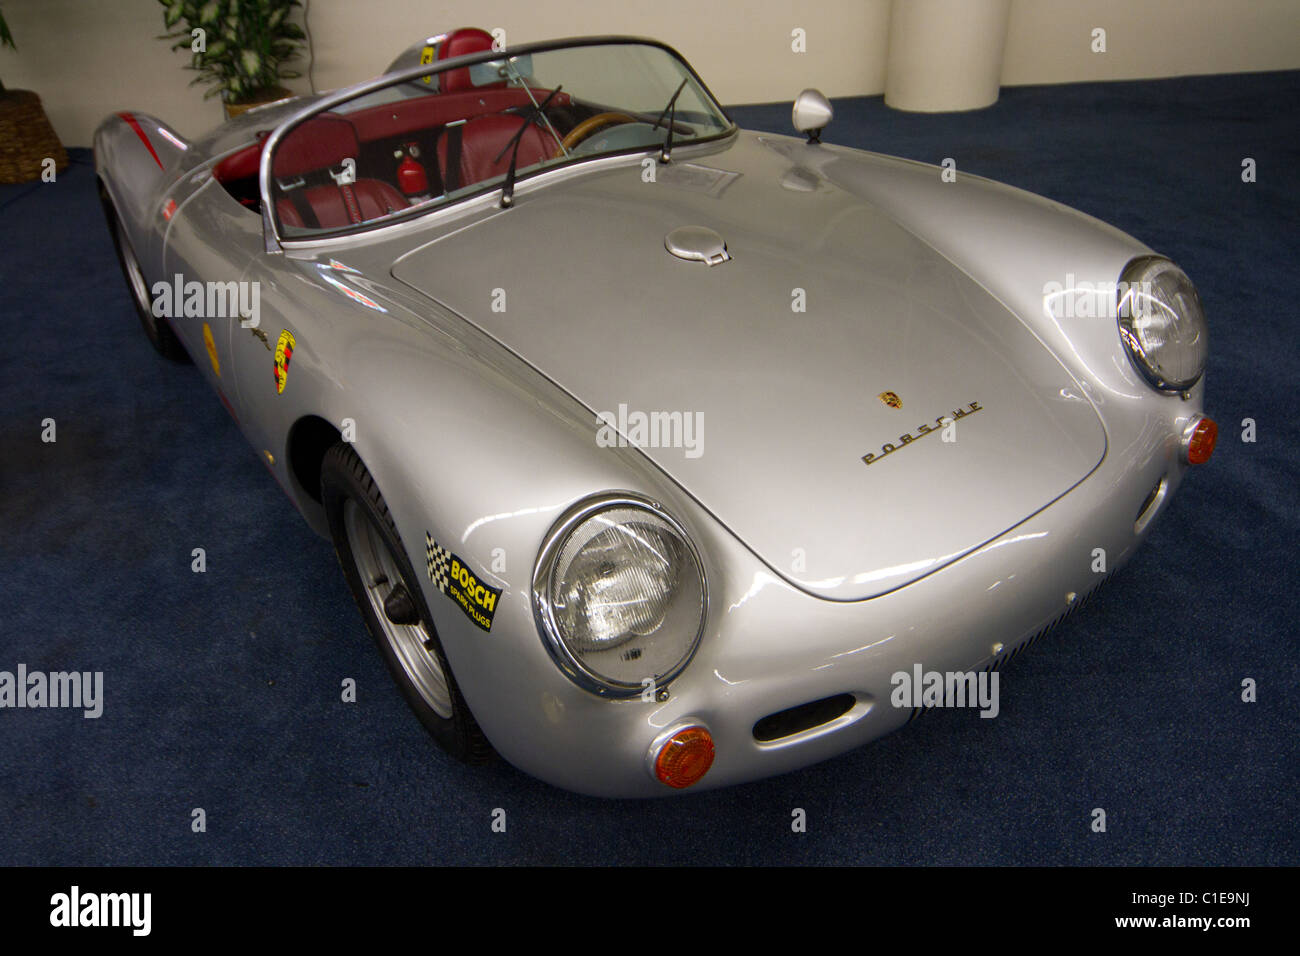 old silver sports car Stock Photo